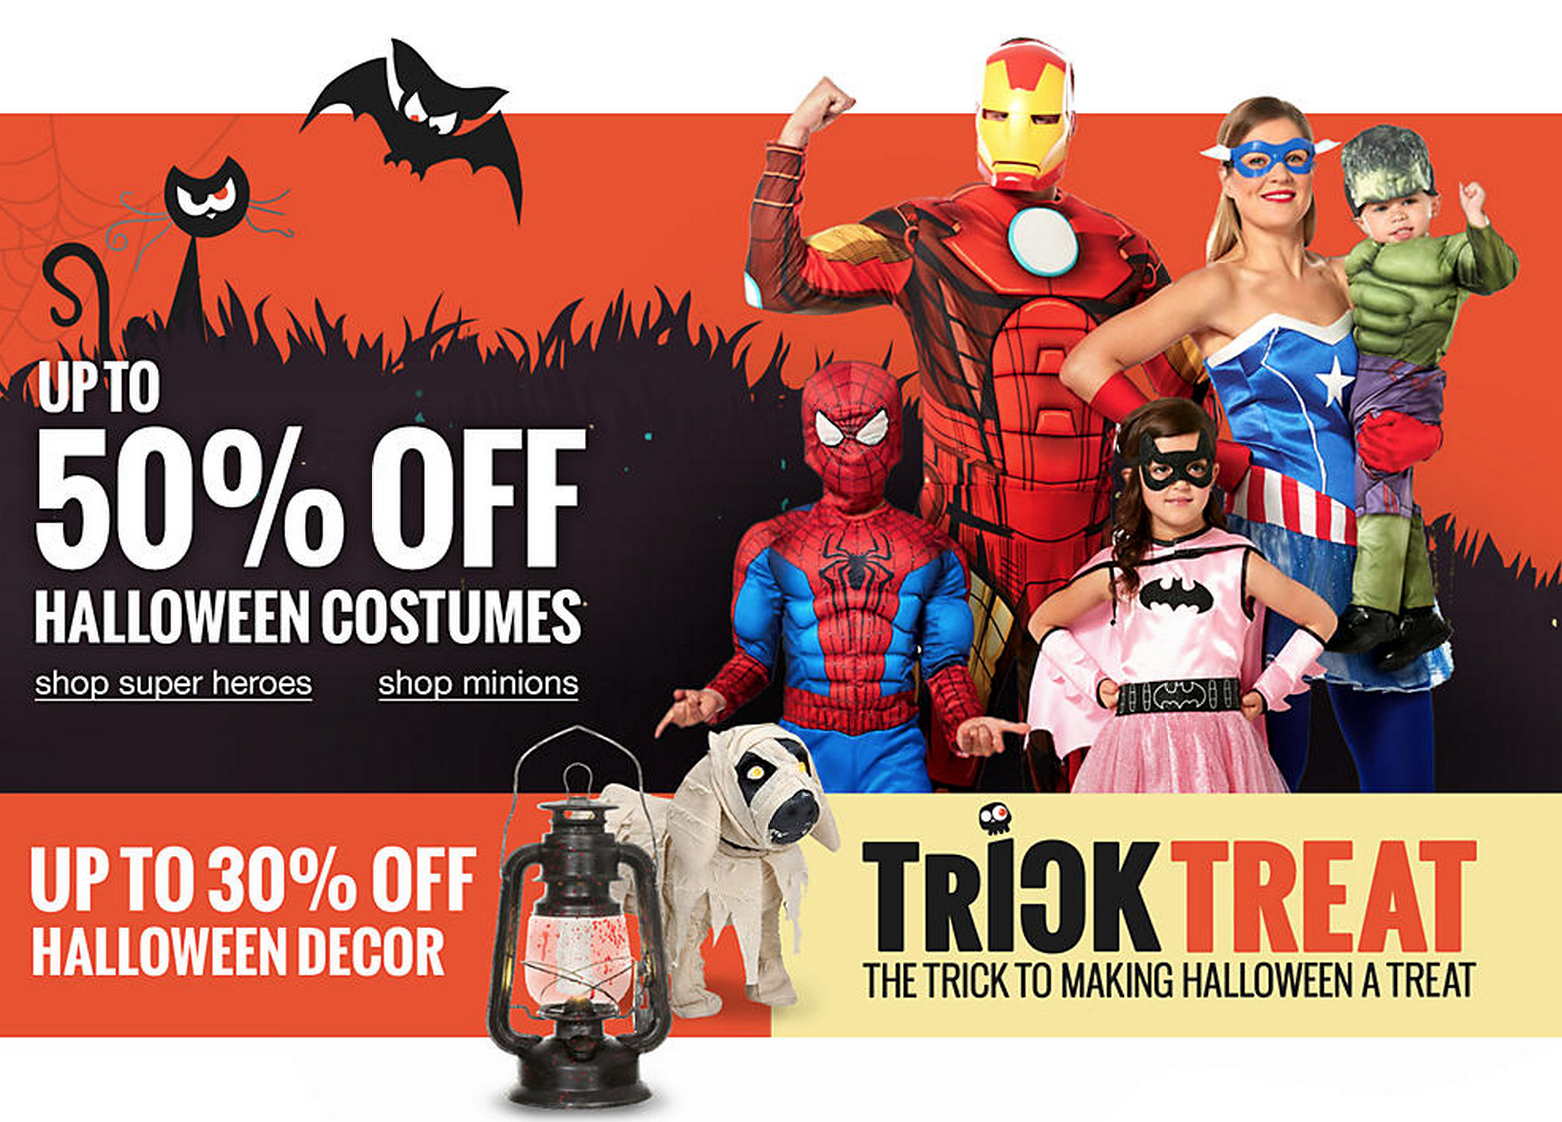 $5 Off Halloween Costumes & Decor $40 or More at Kmart!